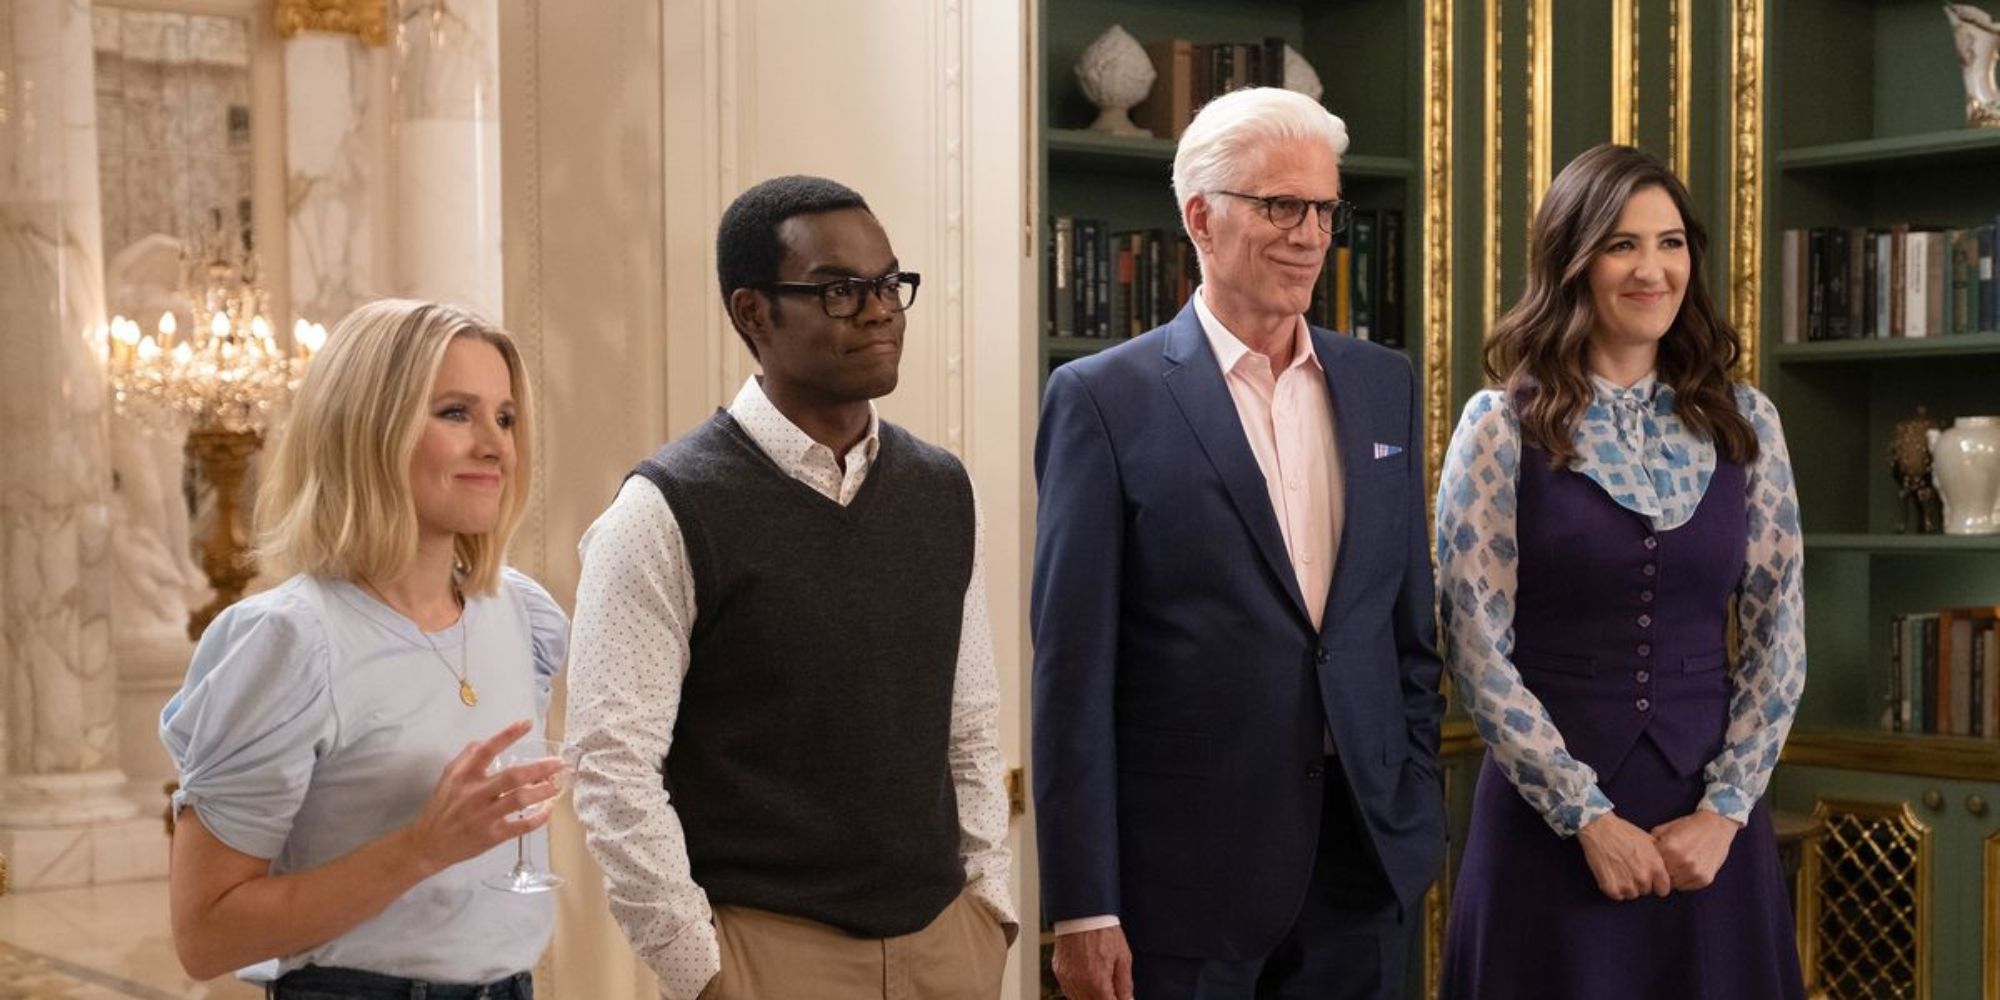 Eleanor, Chidi, Michael and Janet from The Good Place standing together